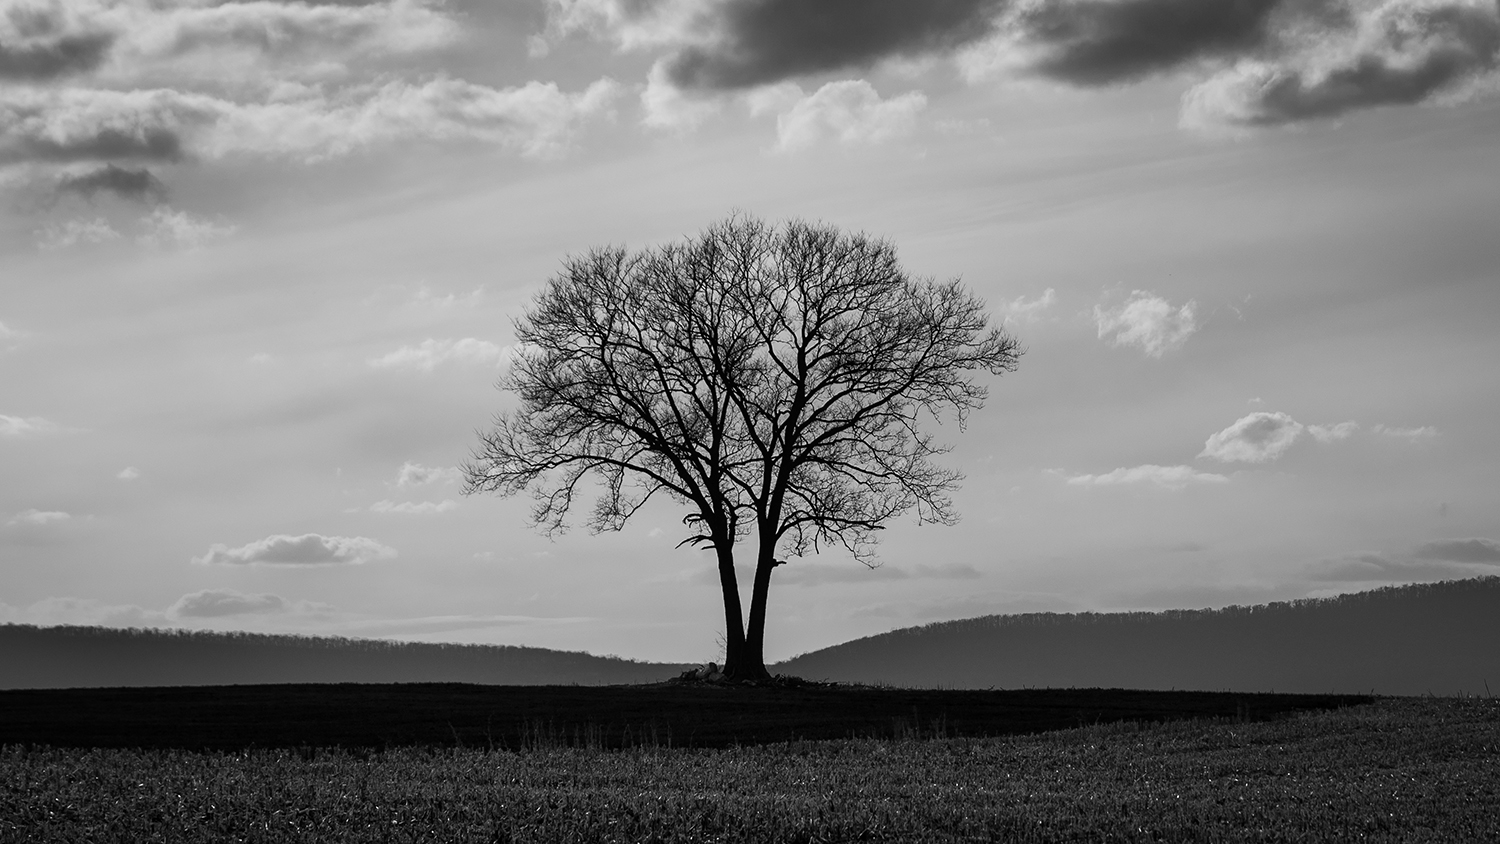 Middletown Lone Tree 